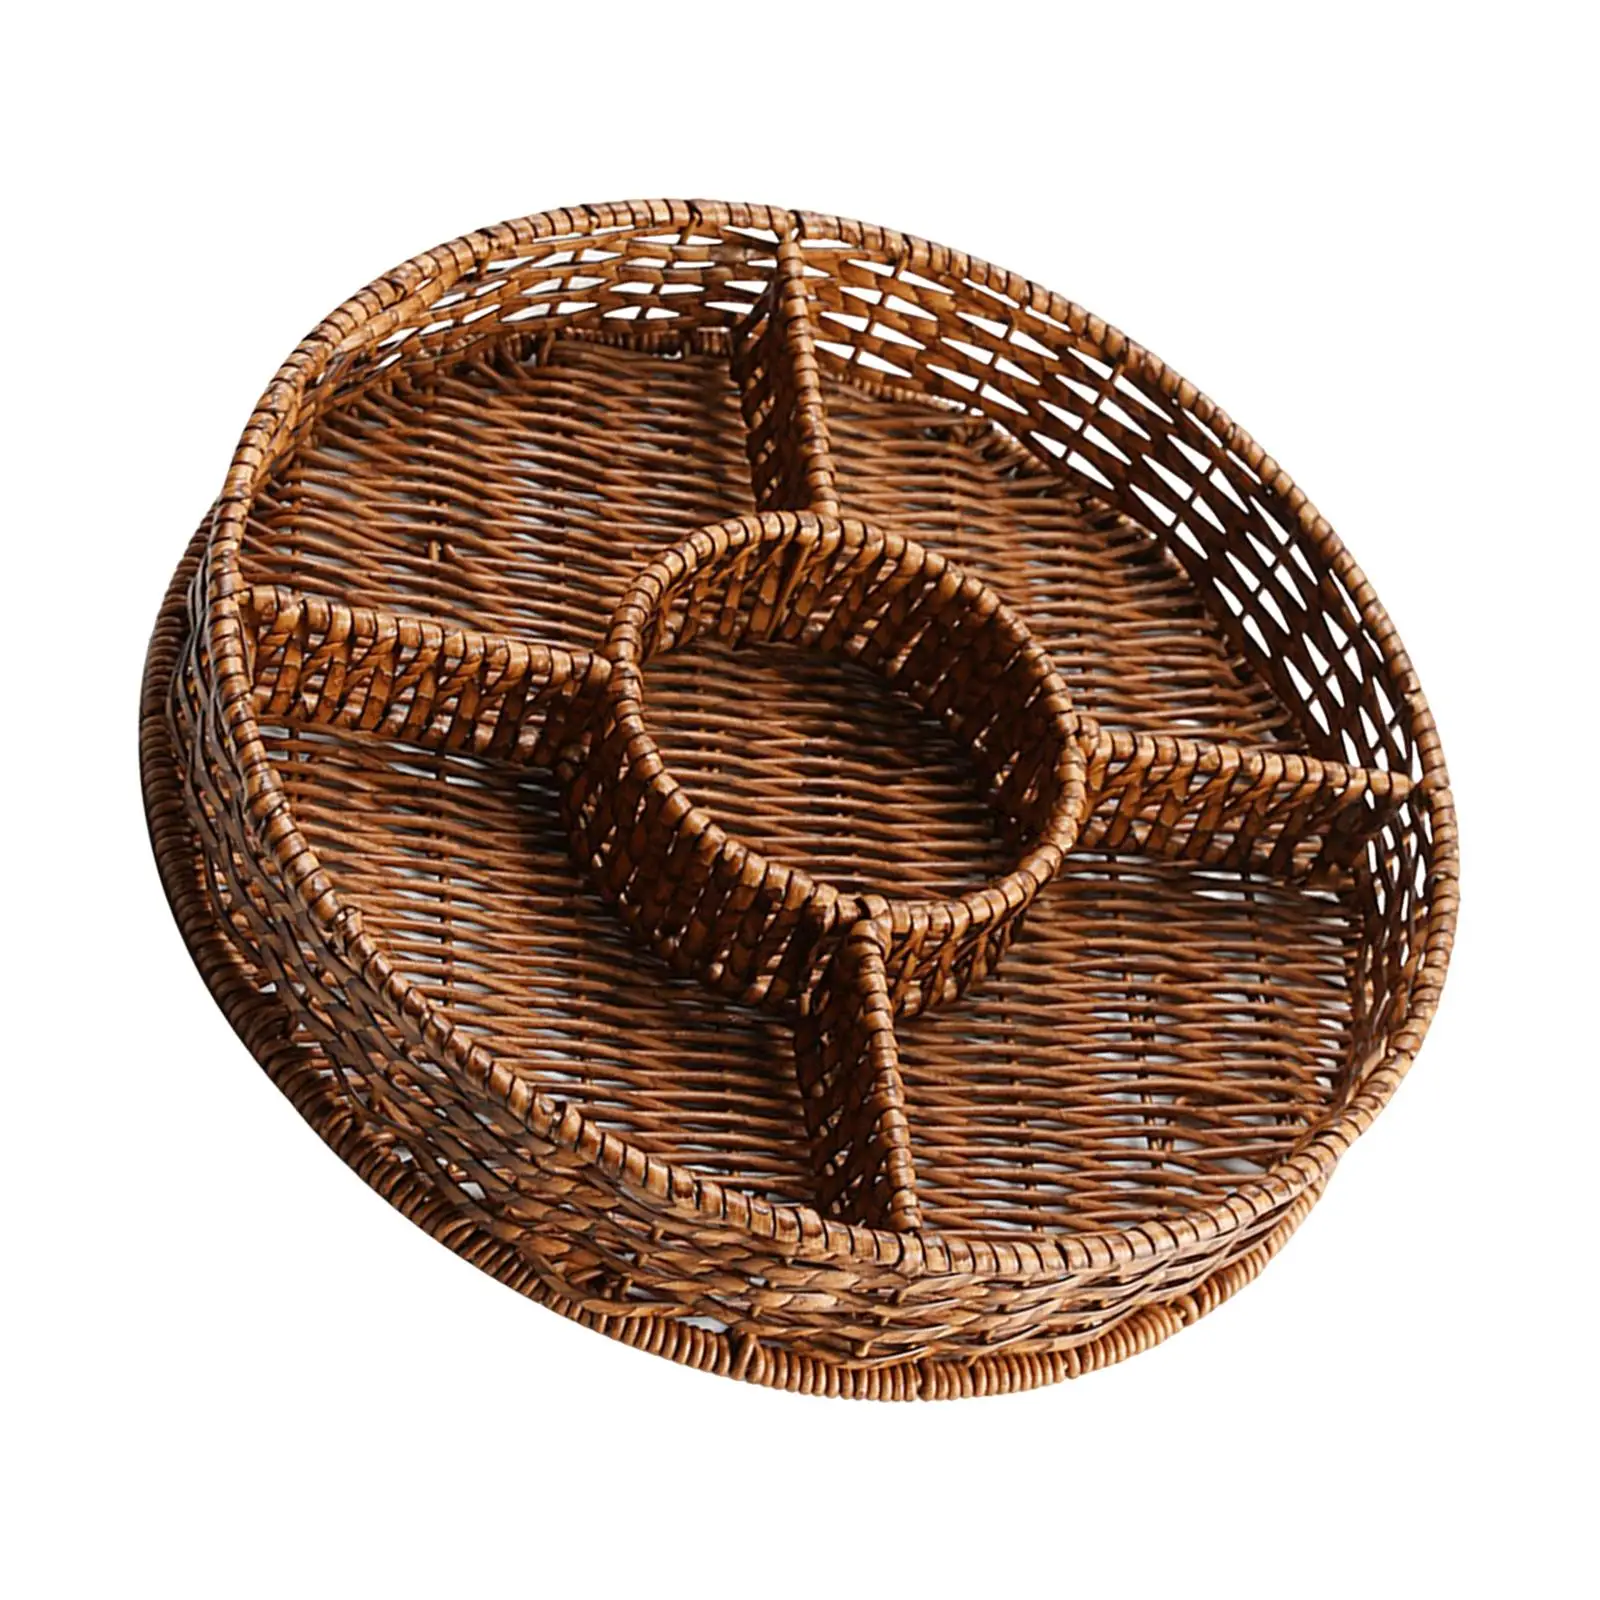 Round Woven Serving Tray Food Basket Imitation Rattan Woven Tray for Bathroom Dining Room